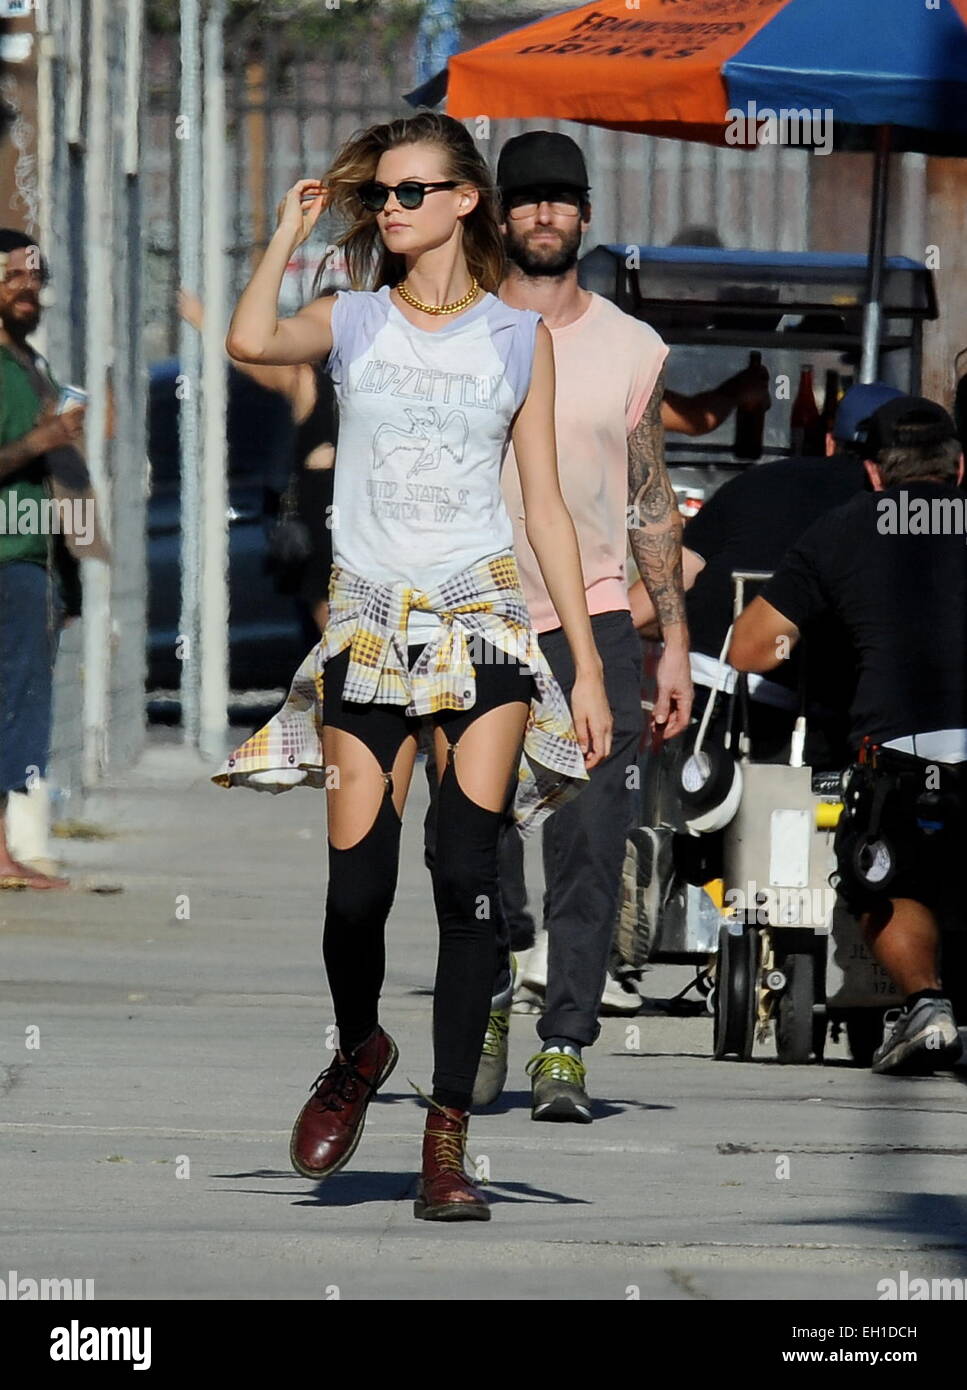 Adam Levine and wife Behati Prinsloo on the set of Maroon 5's music video  for their next single 'Animals' Featuring: Adam Levine,Behati Prinsloo  Where: Los Angeles, California, United States When: 30 Aug